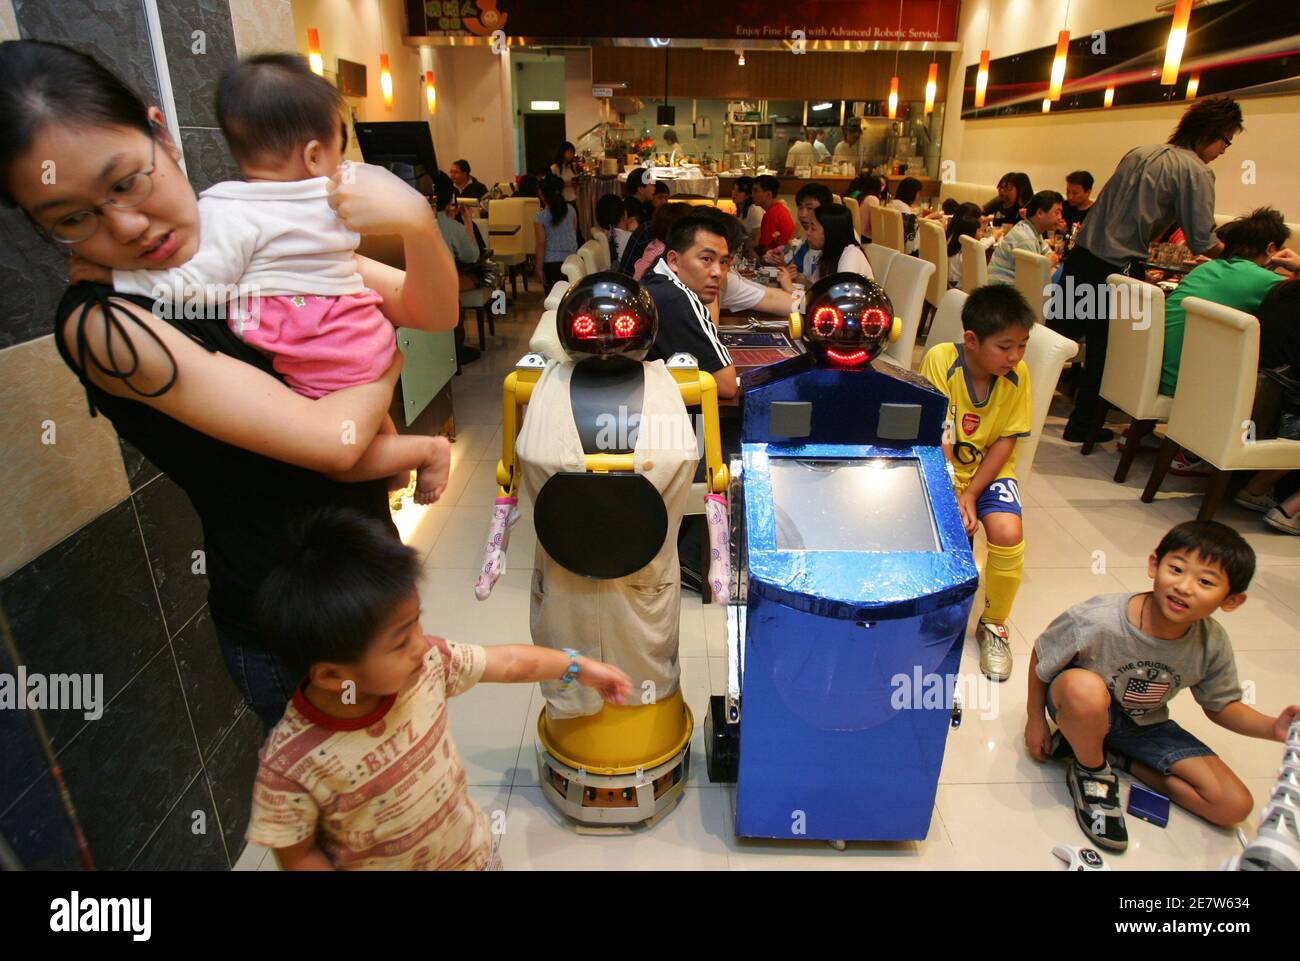 Children play with Robot No.1 (R) and No.2 at a restaurant called Robot  Kitchen in Hong Kong October 14, 2006. Robot No.1 is designed to take  orders from customers while Robot No.2